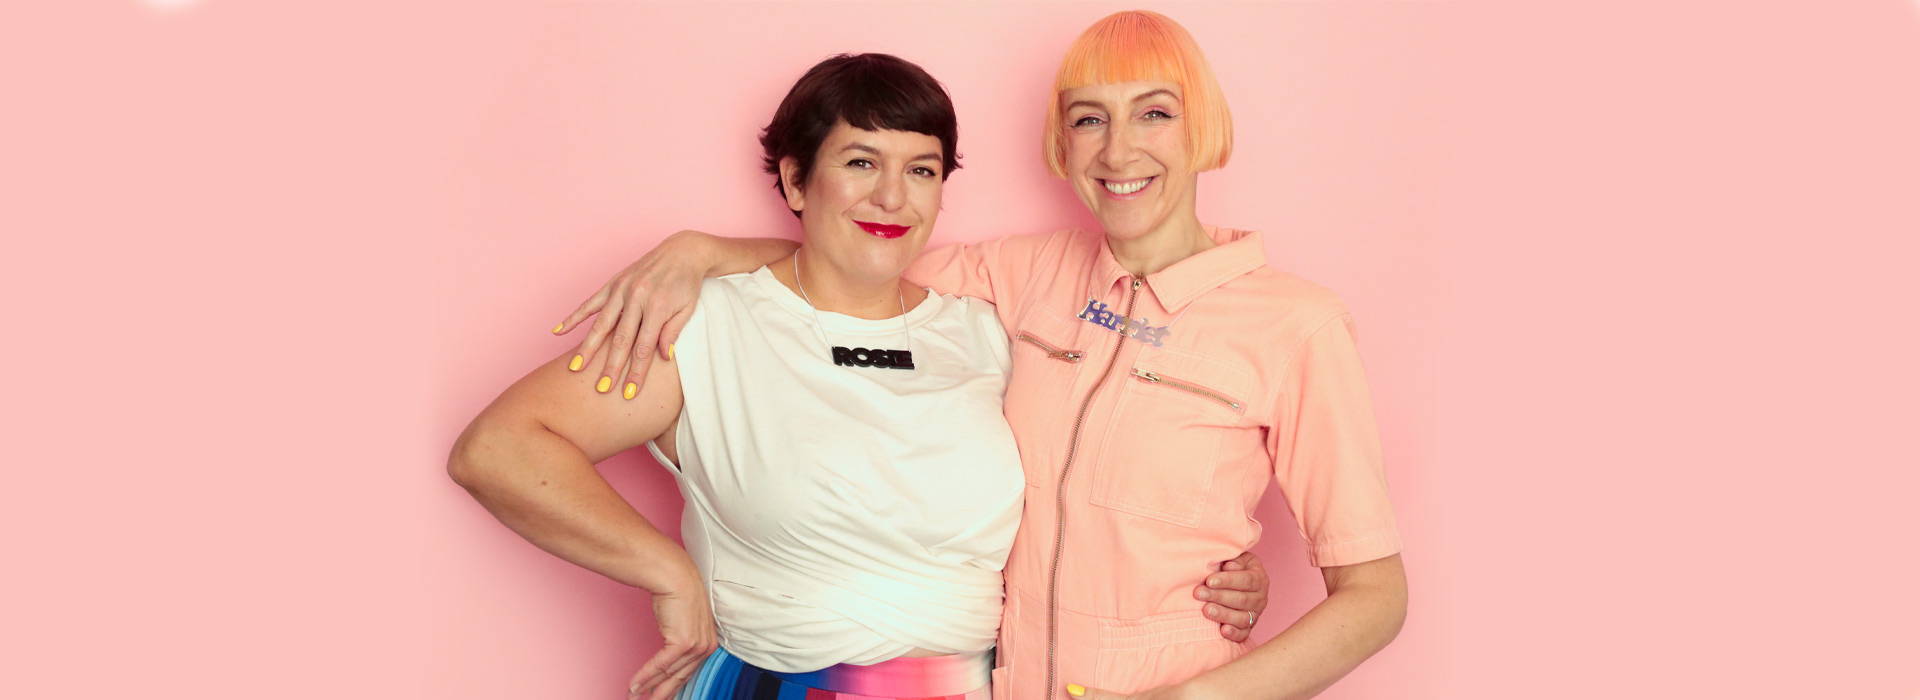 Rosie and Harriet, Tatty Devine Co-Founders